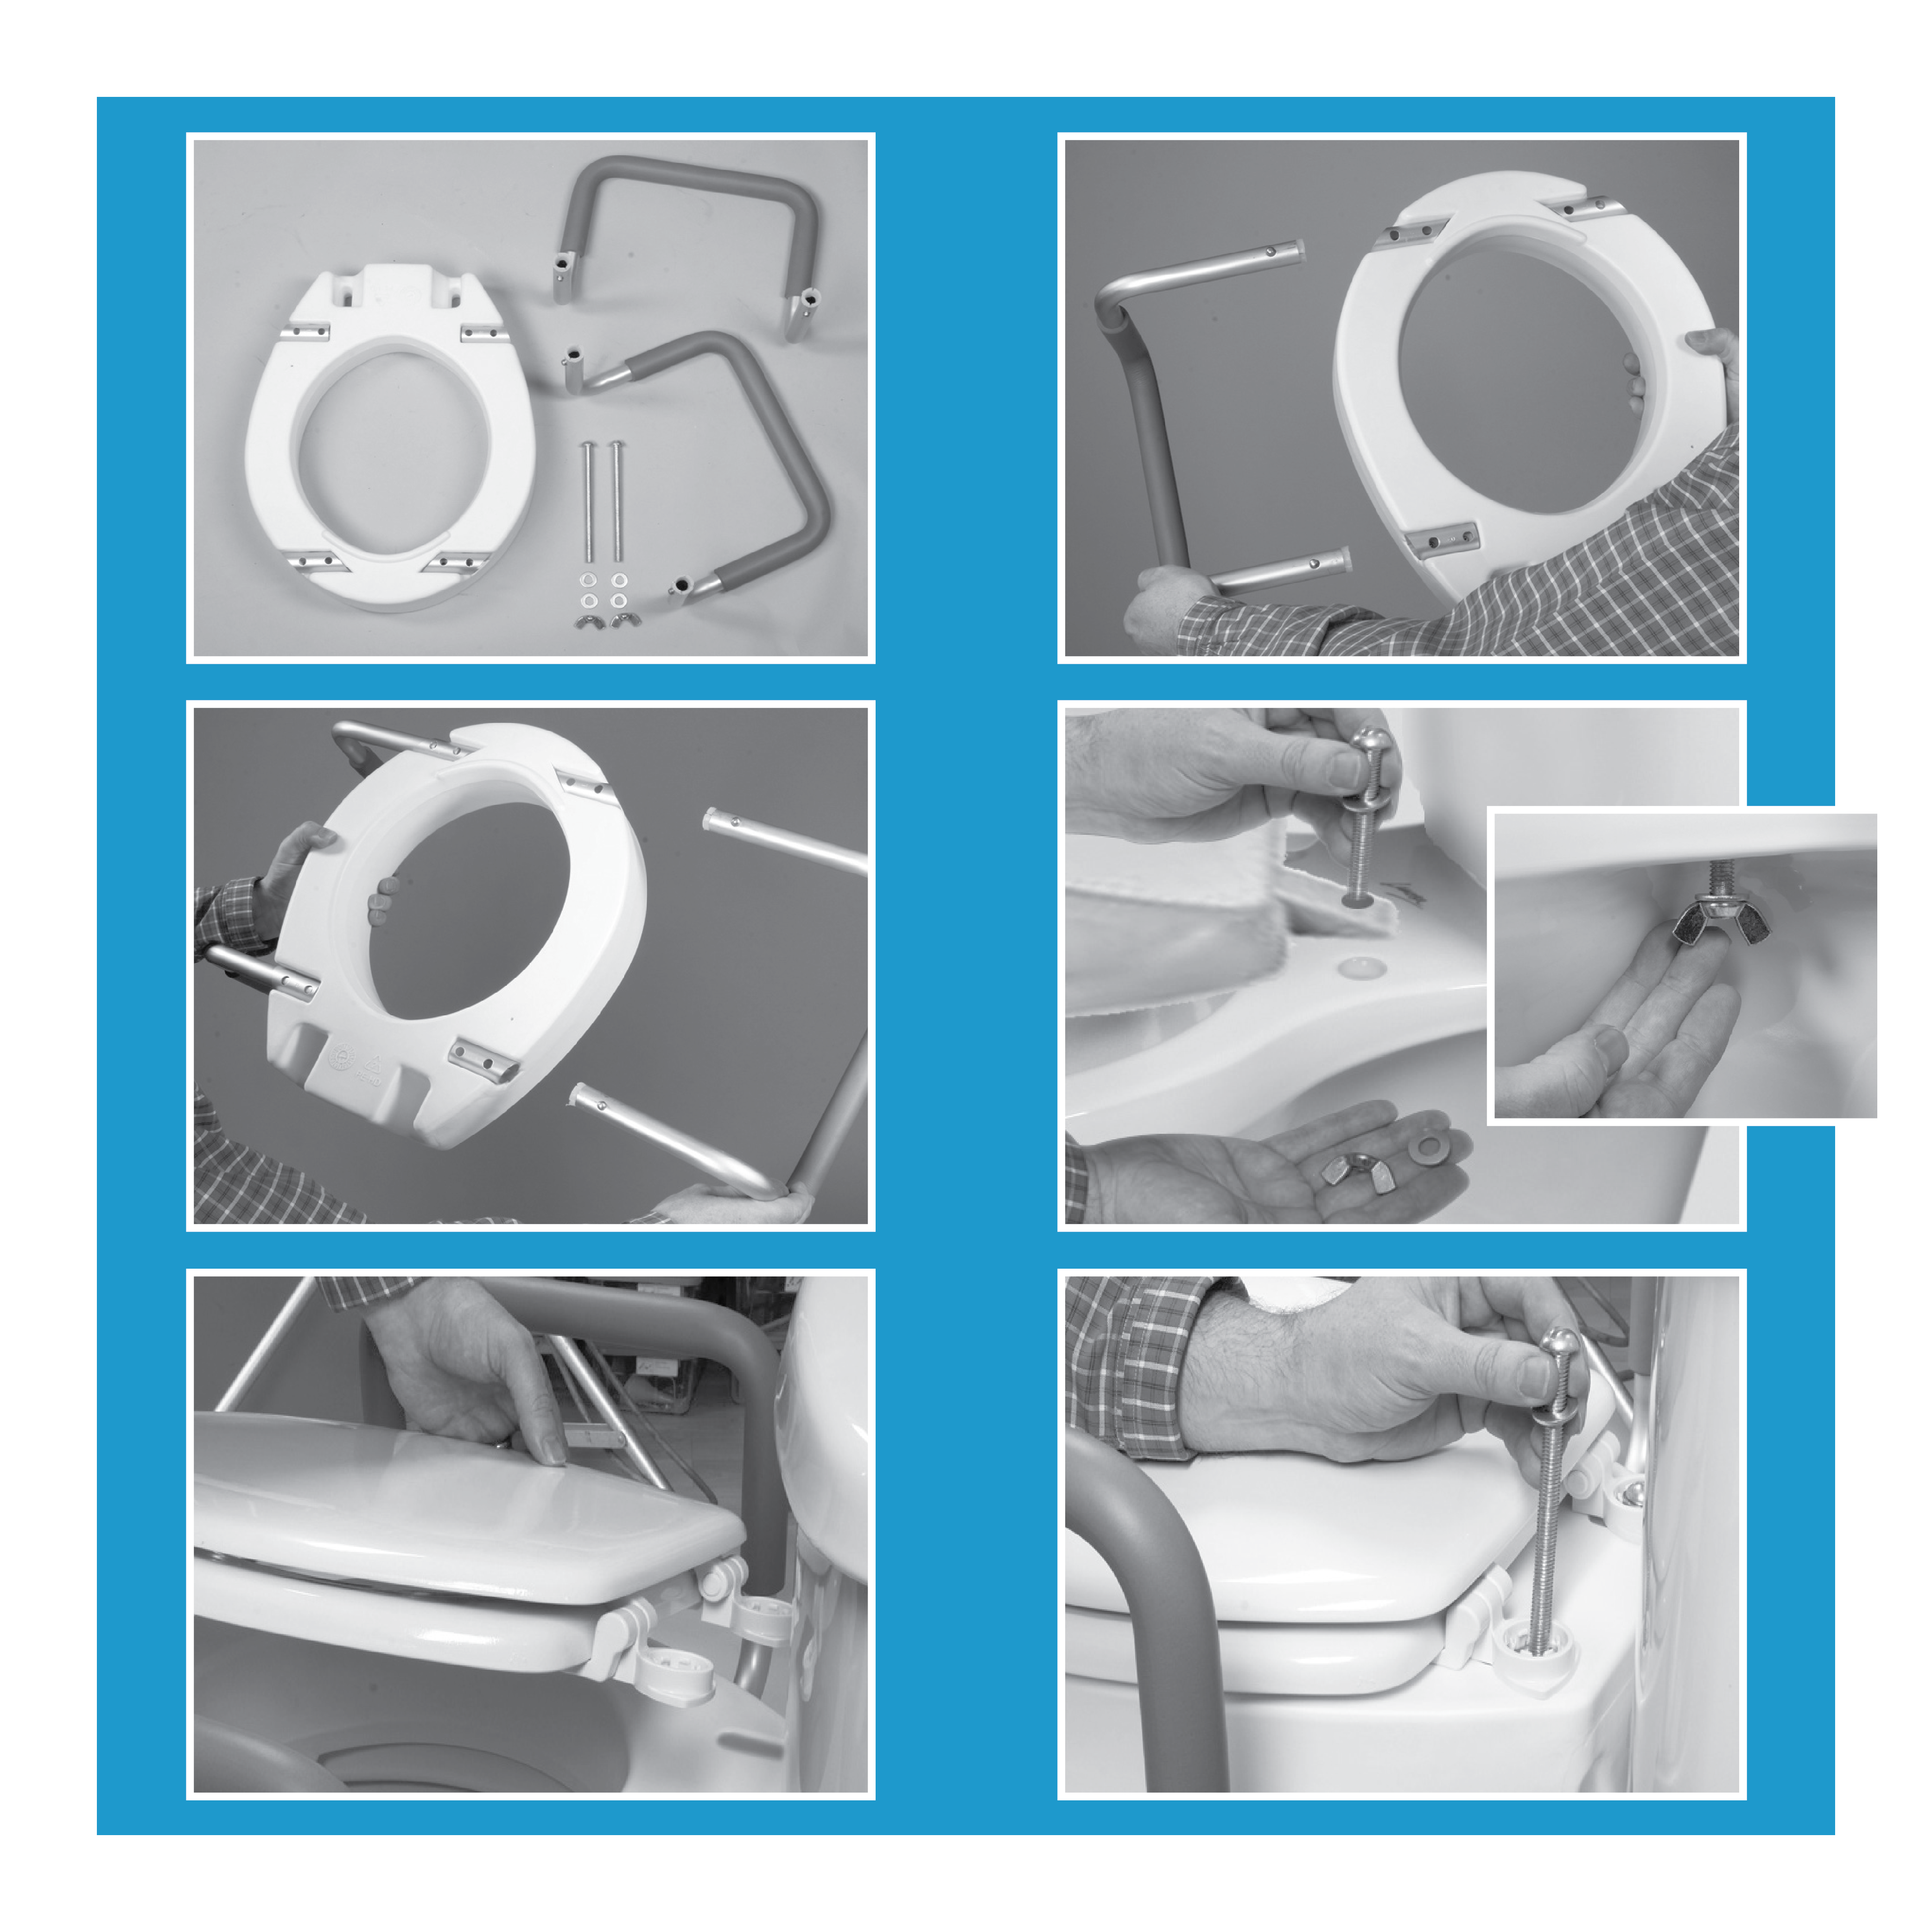 Carex Toilet Seat Elevator With Handles - For Standard Toilet Seats - Carex Health Brands